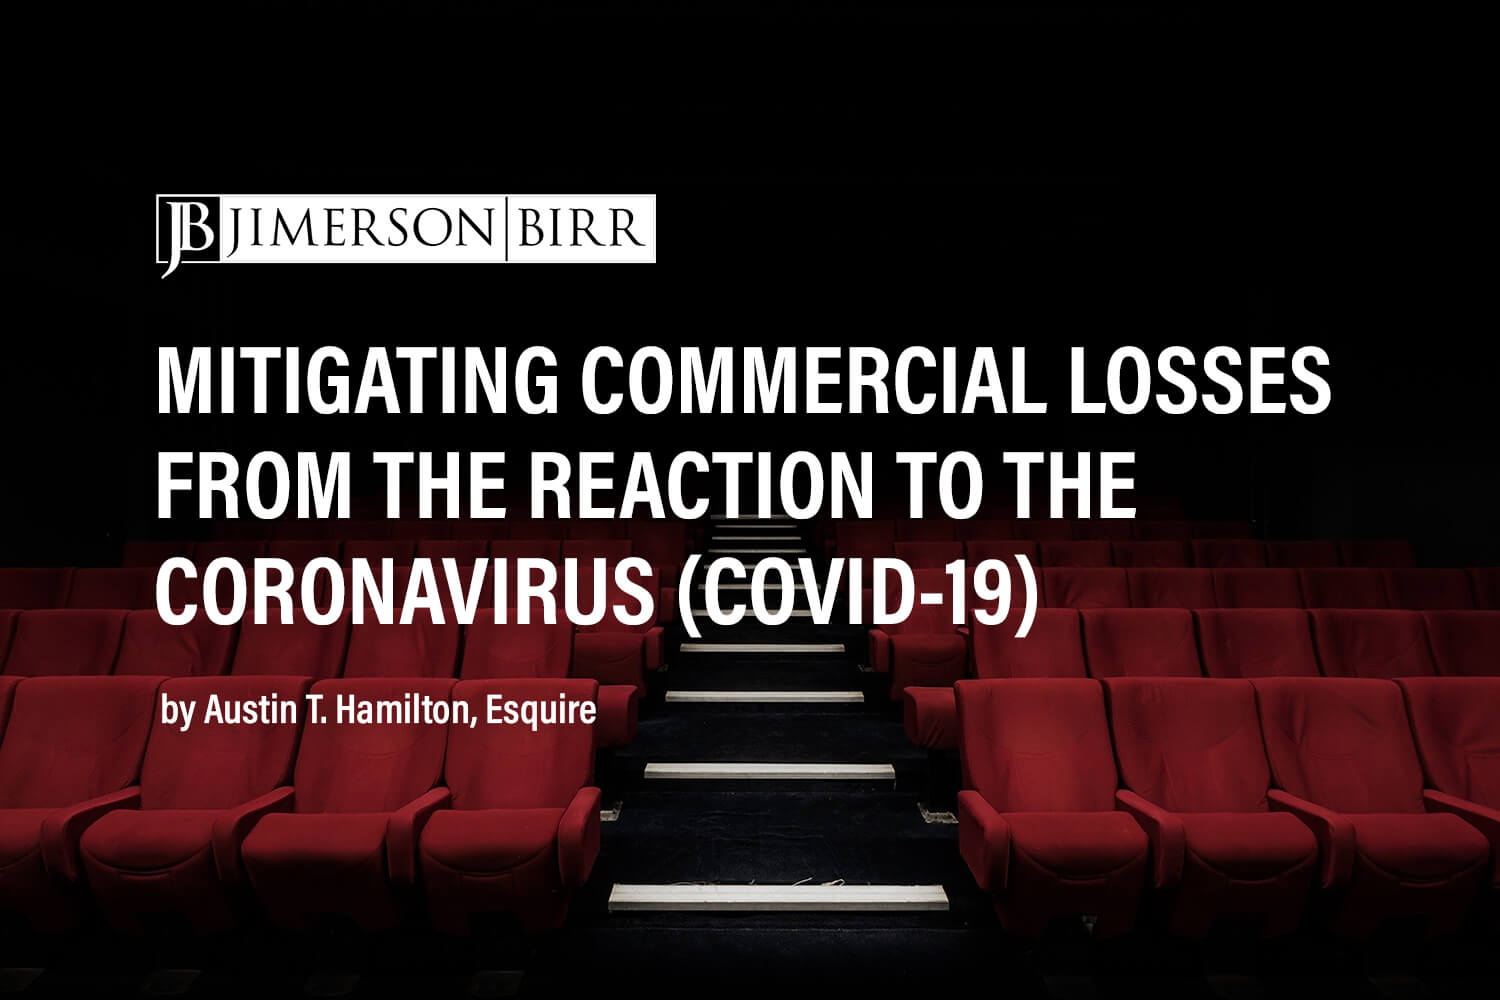 Mitigating Commercial Losses From the Reaction to the Coronavirus (COVID-19)